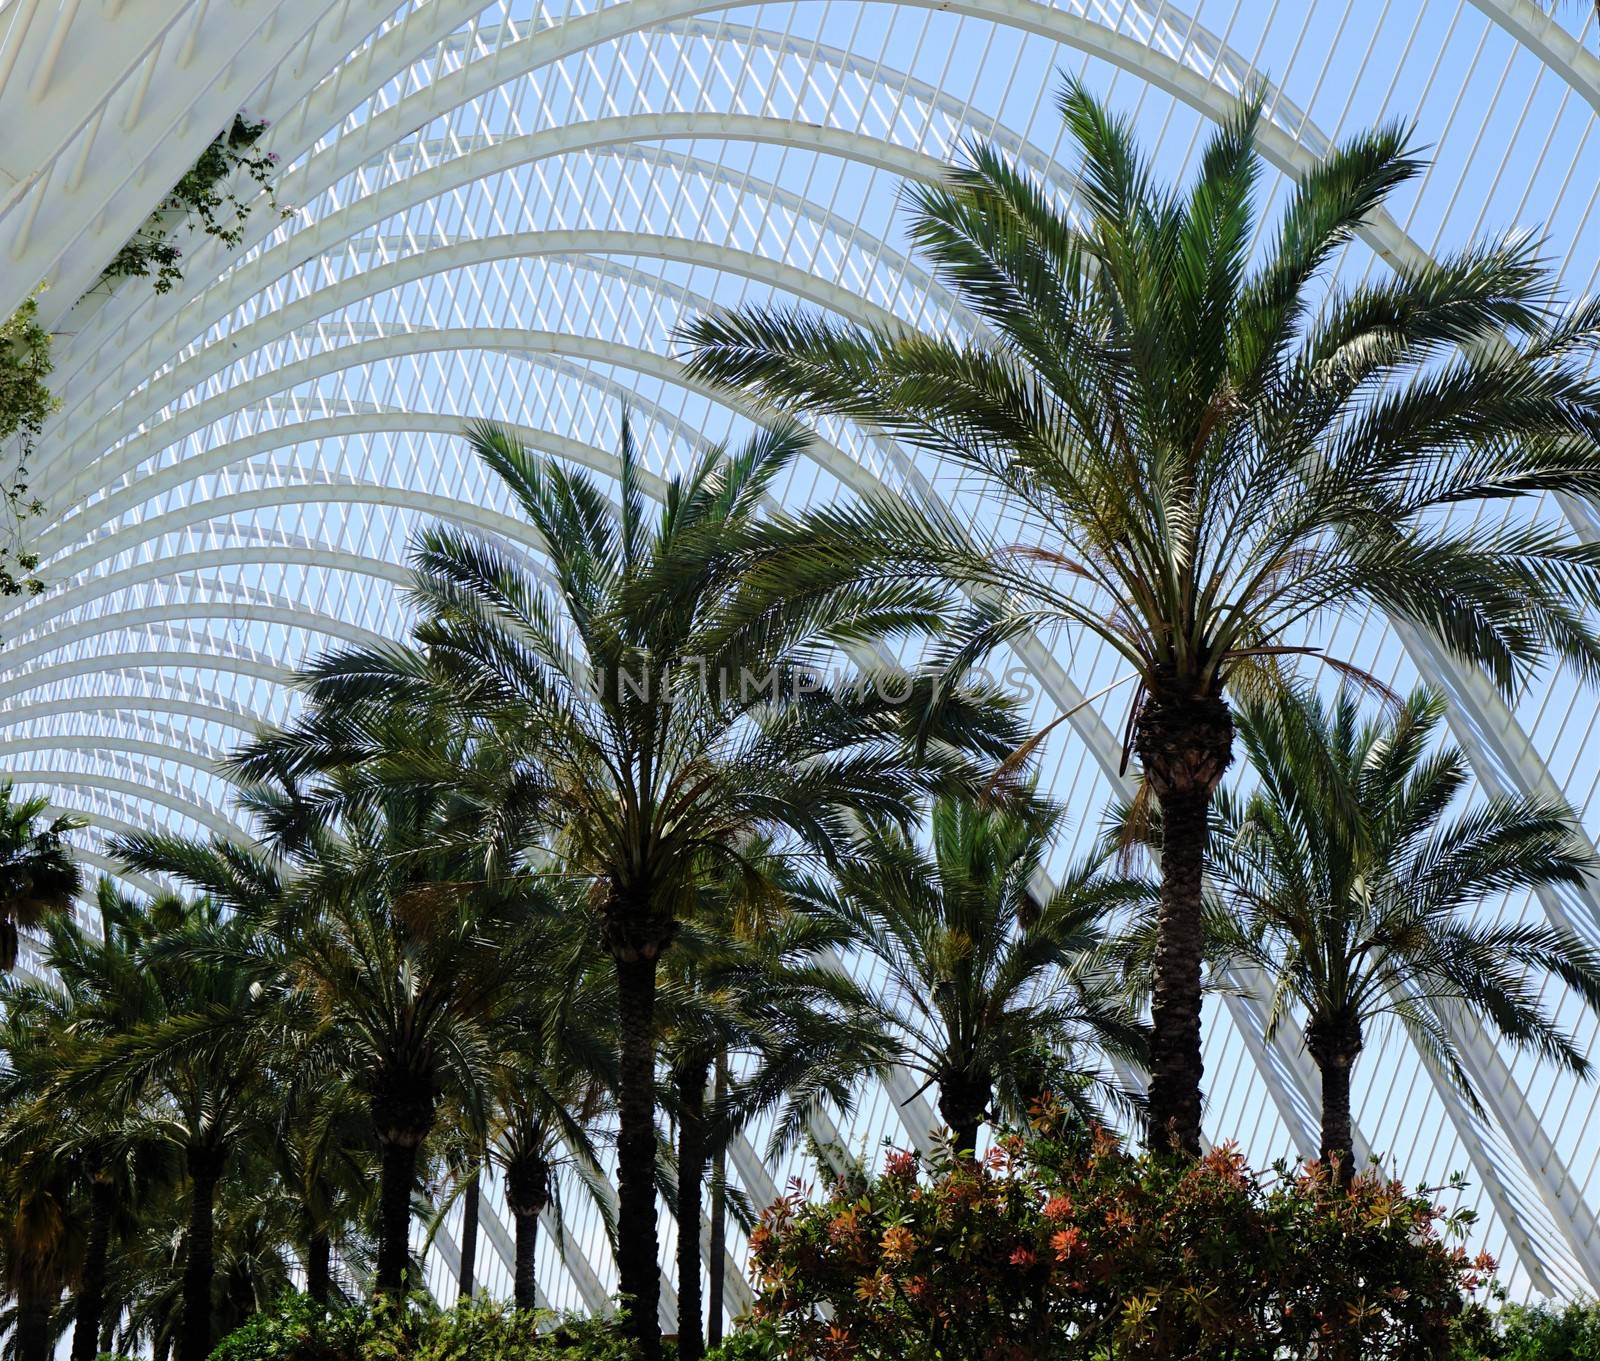 Palm trees in l'Umbracle in the City of Arts and Sciences, Valencia Spain